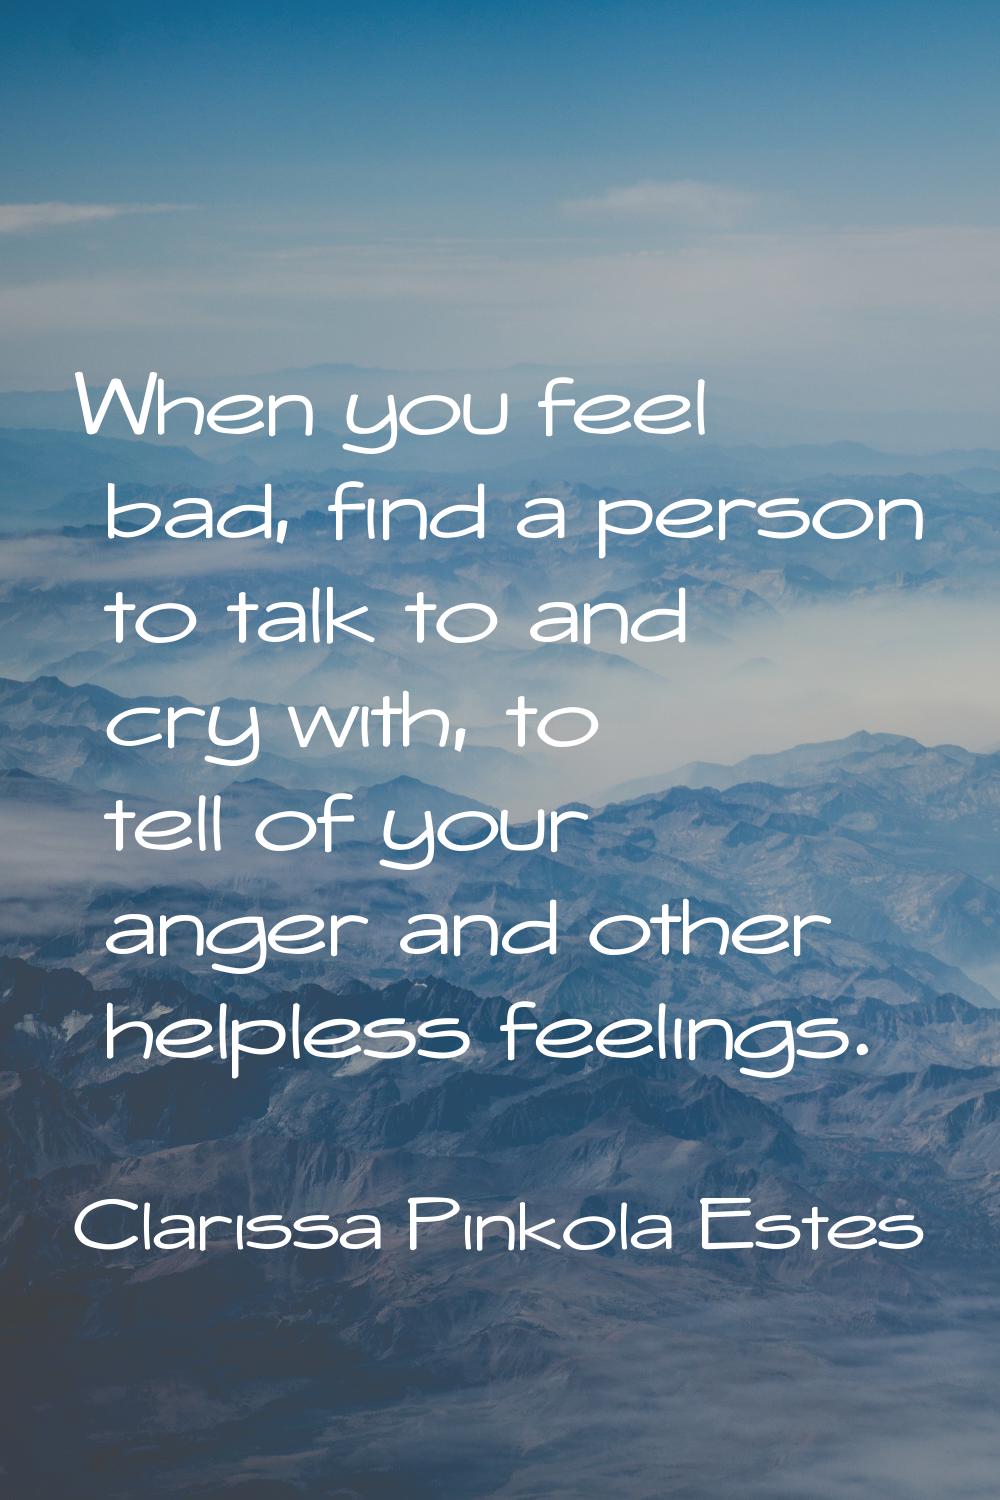 When you feel bad, find a person to talk to and cry with, to tell of your anger and other helpless 